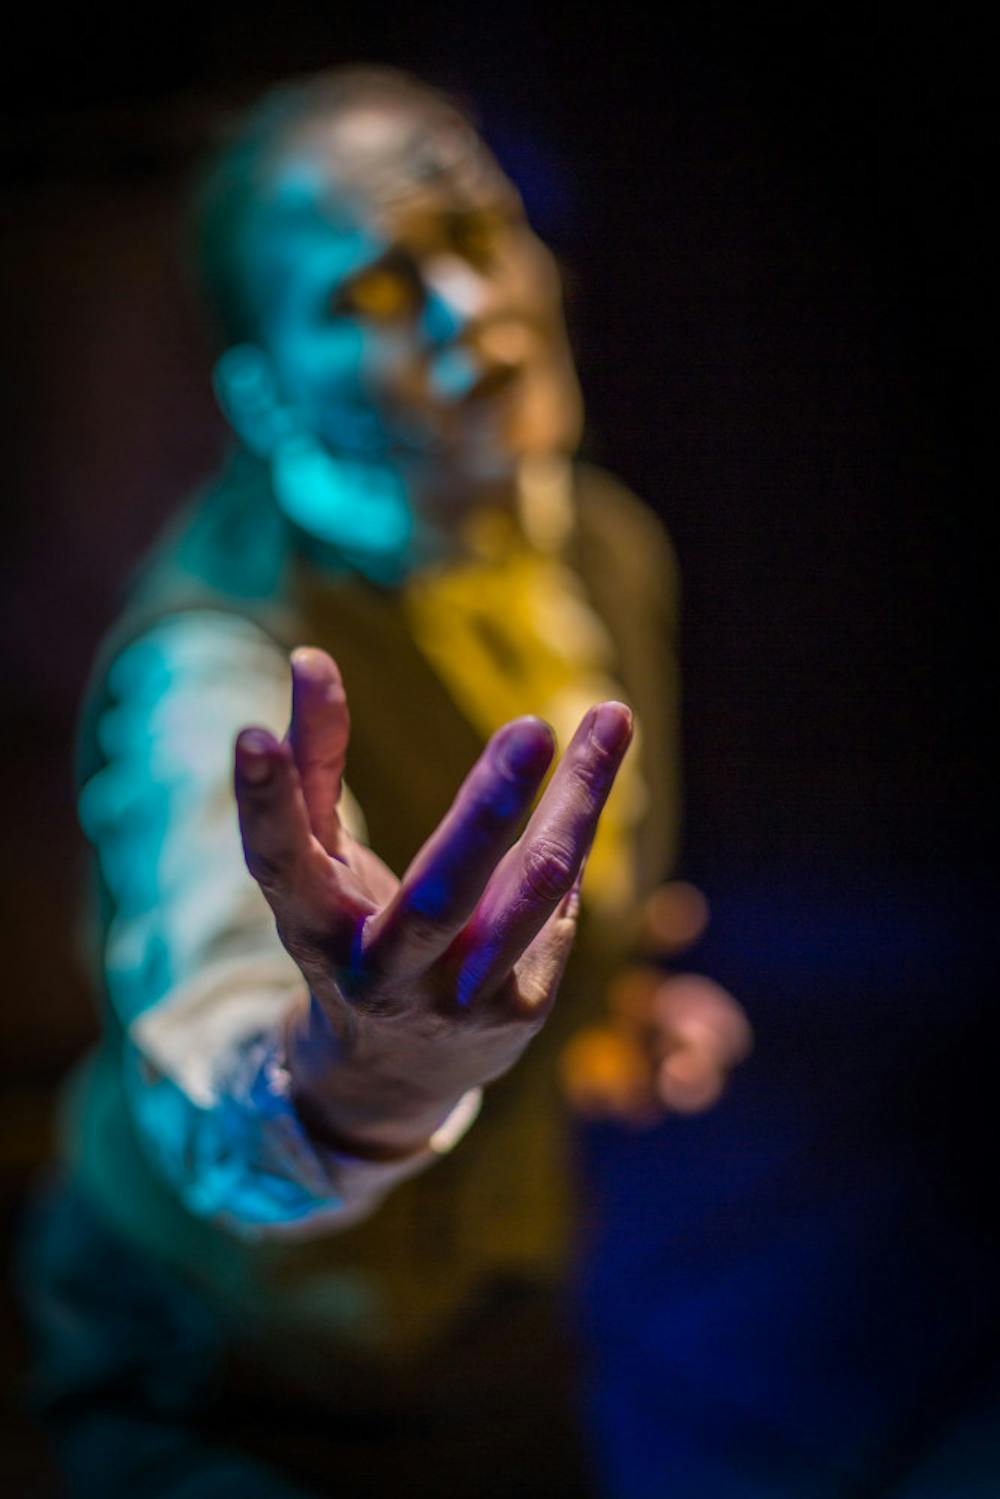 <p dir="ltr" align="justify">An actor from the play "All Girl Frankenstein", which was shown at the Hippodrome Theatre in 2015, reaches out a hand. </p>